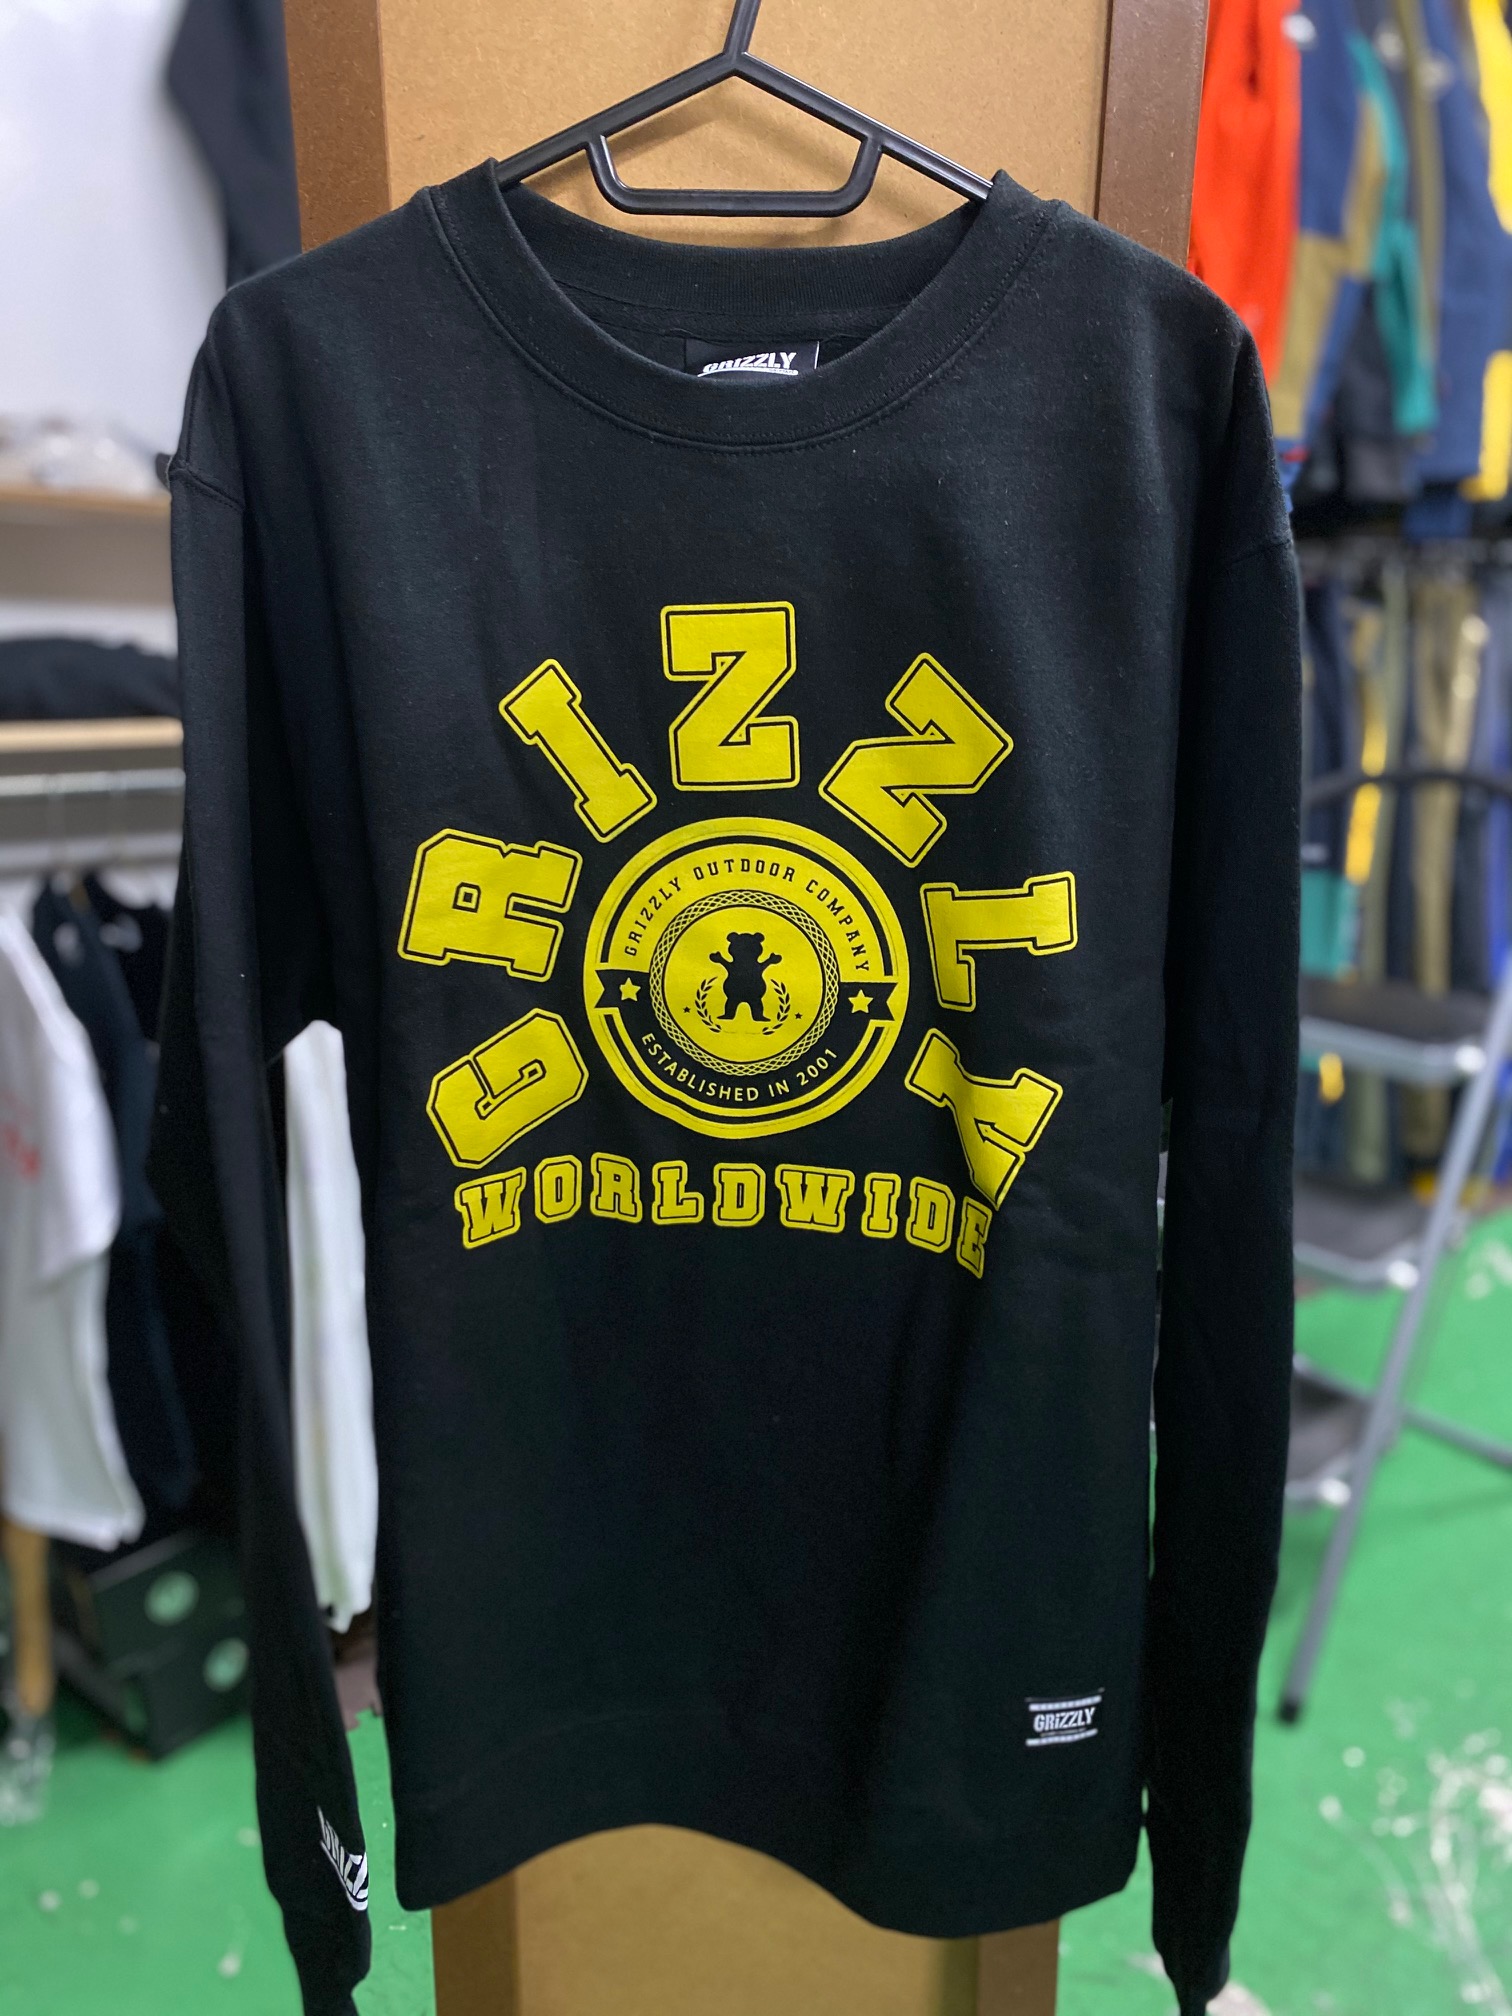 GRIZZLY 2020Holiday 入荷しました！！